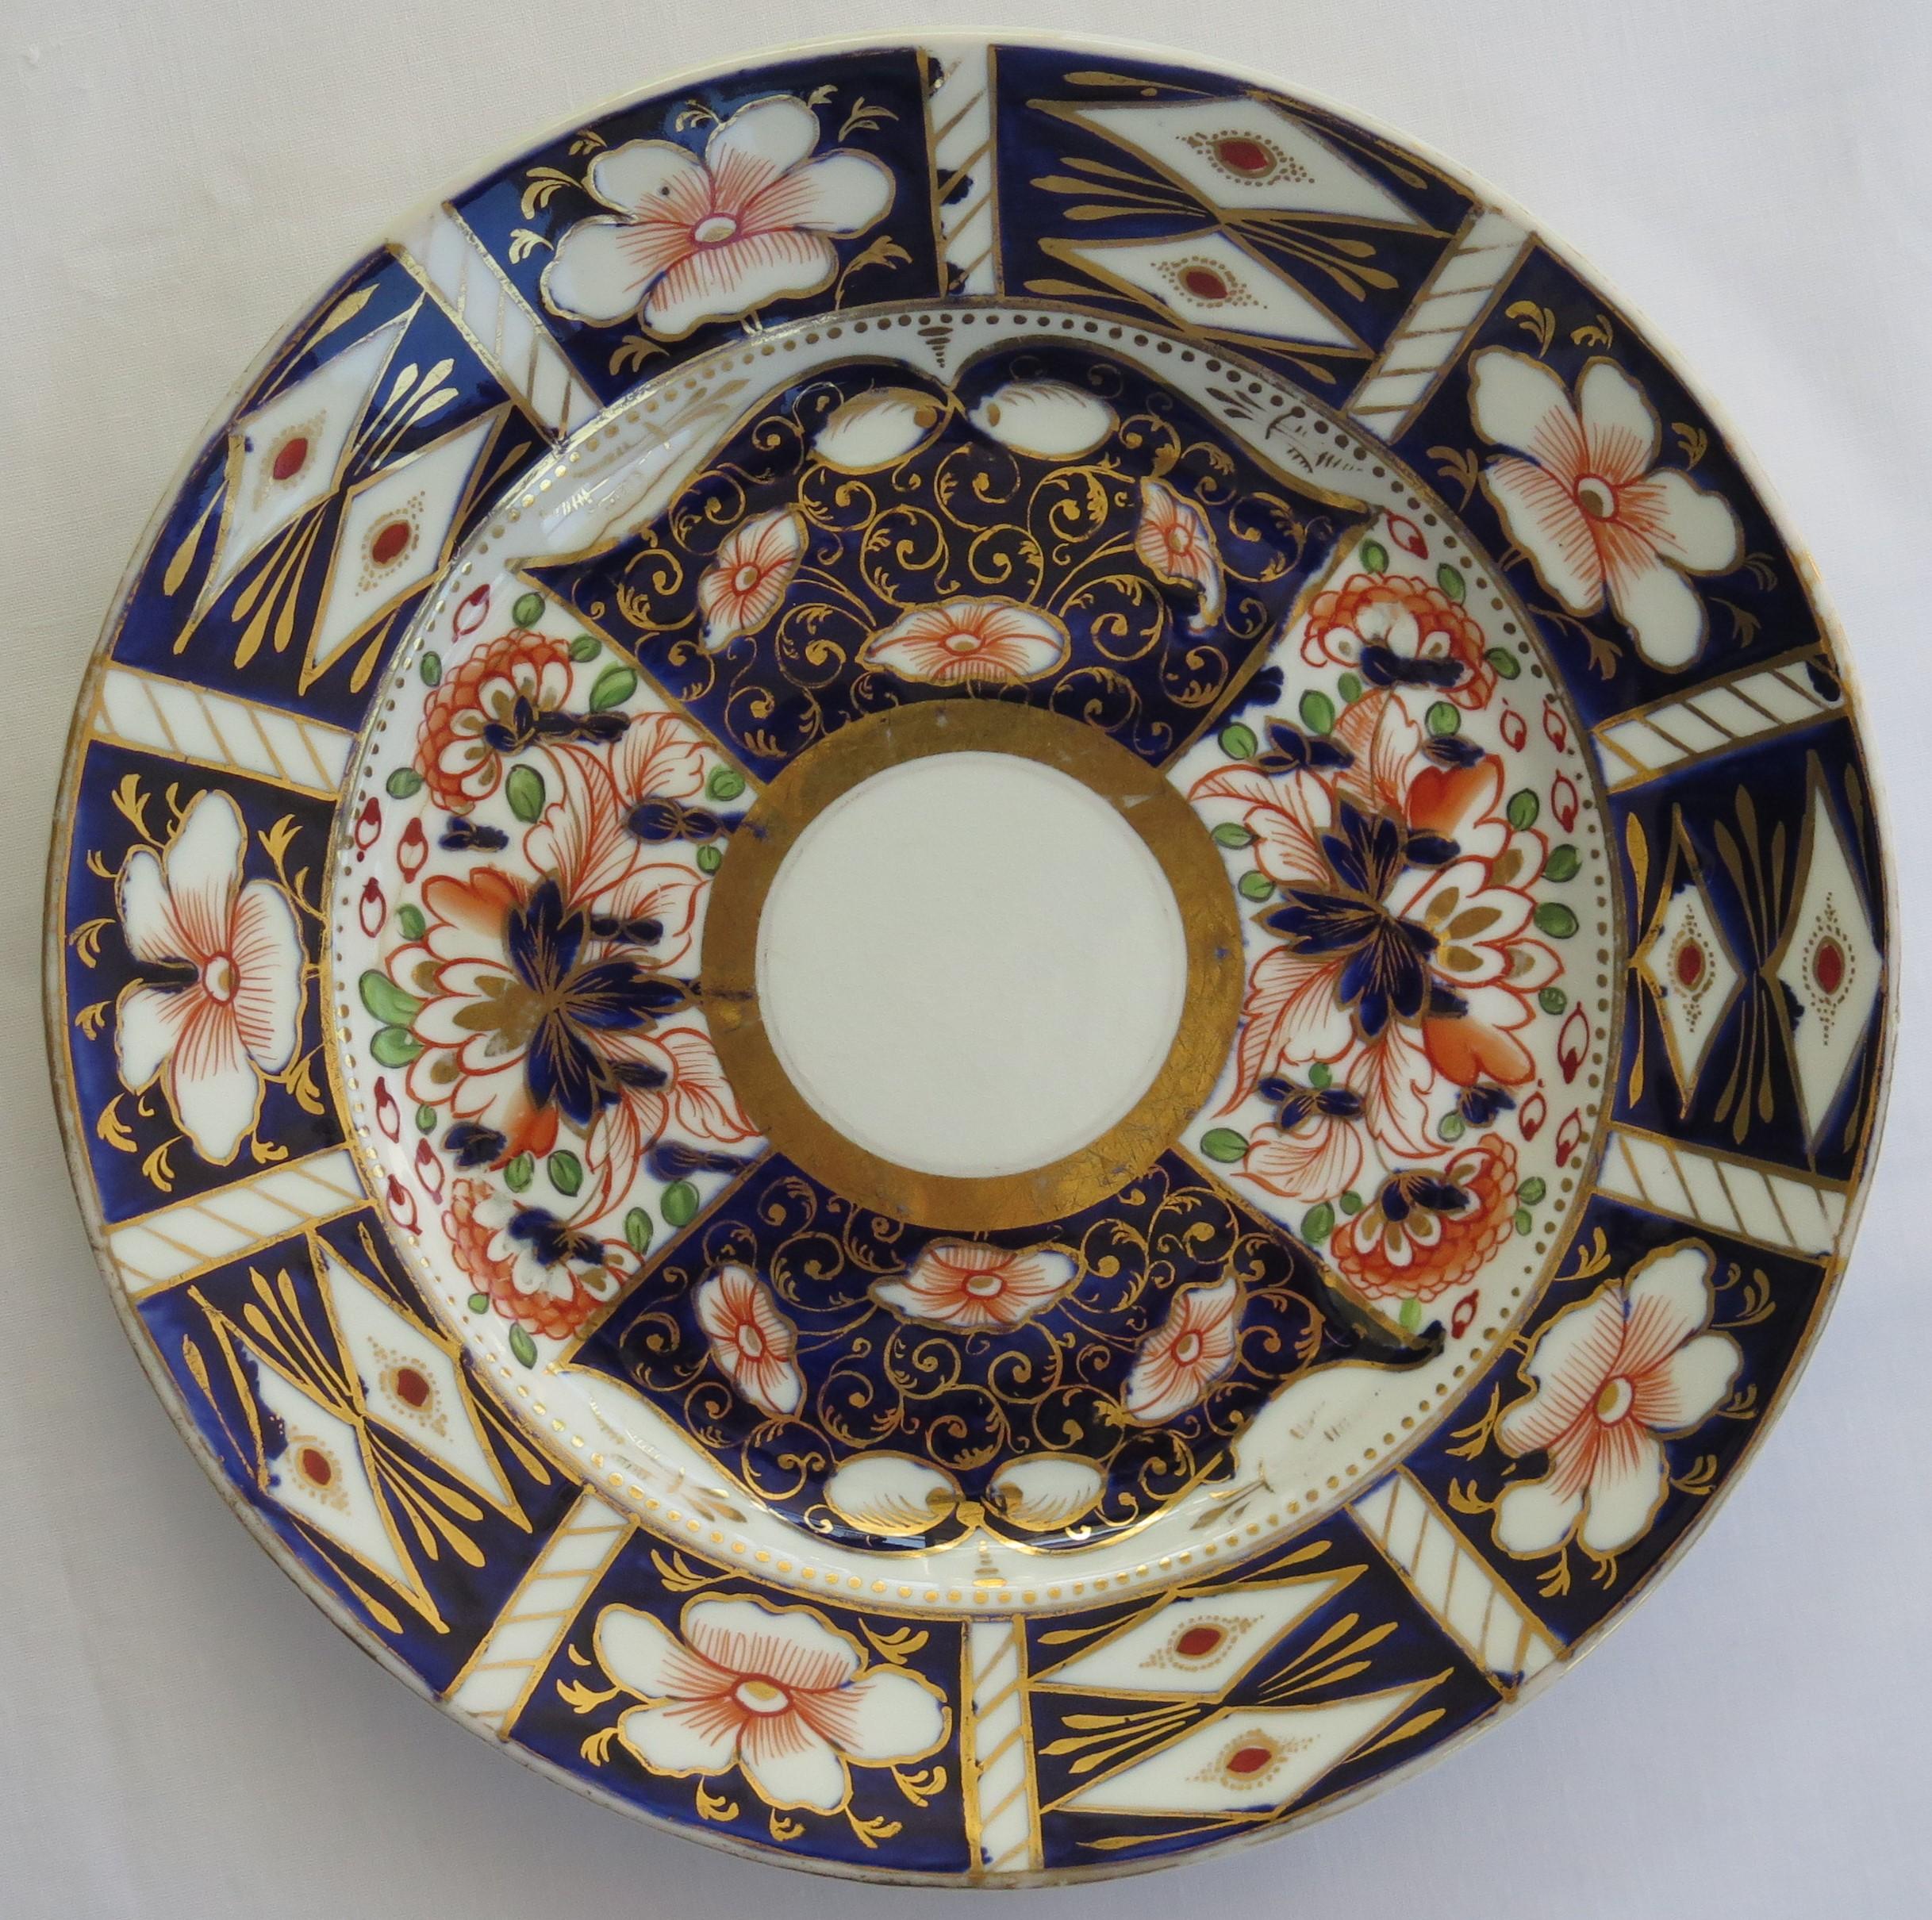 SIX Davenport Porcelain Plates Hand Painted and Gilded Pattern, Circa 1870 For Sale 8